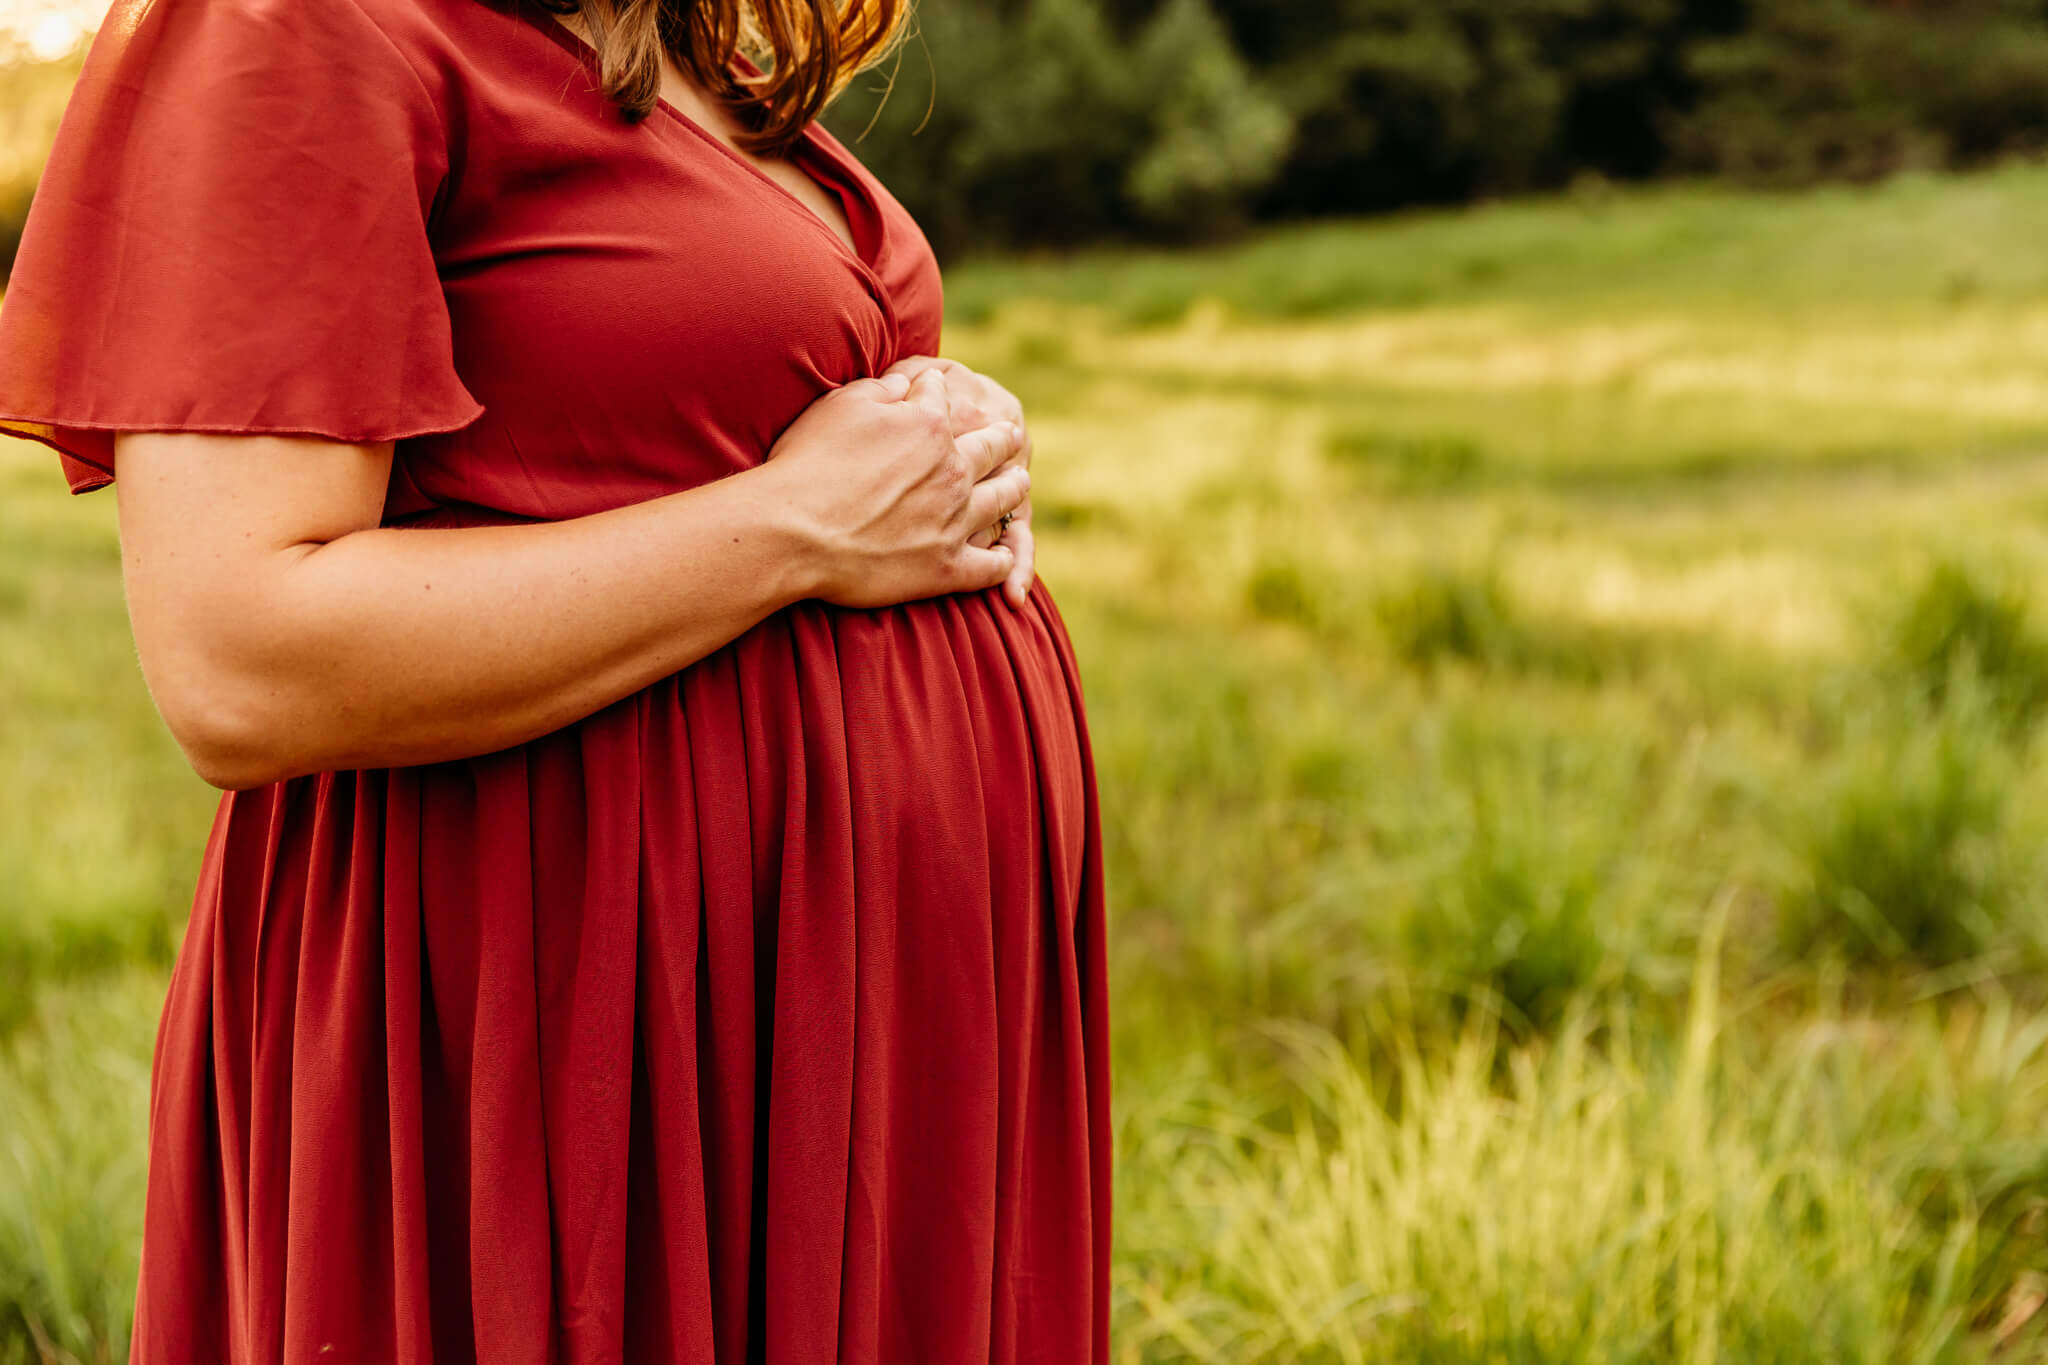 mom to be in a red dress resting hands on her baby bump in a field near Appleton